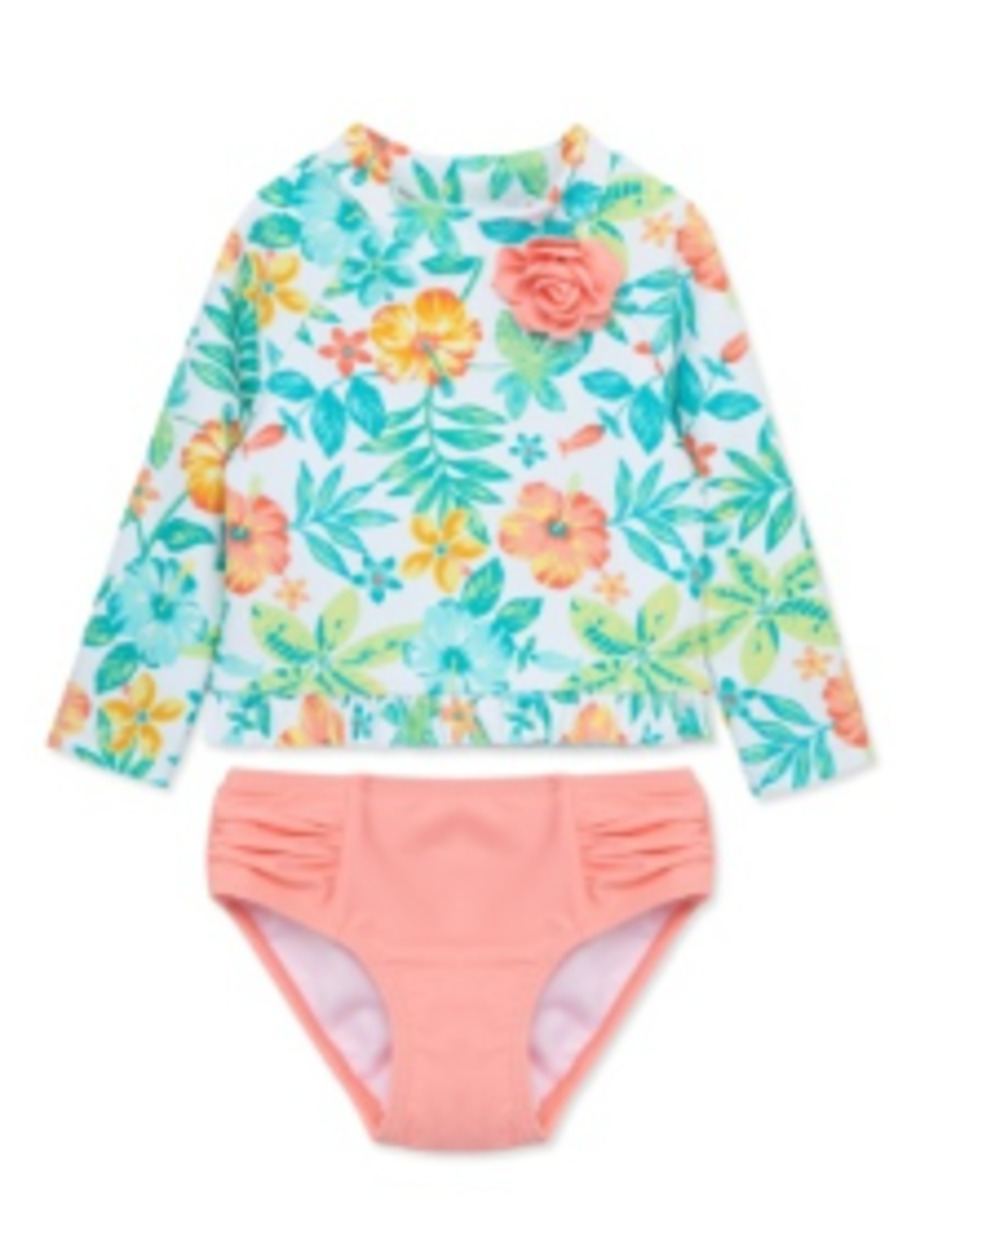 Little Me LWK13991 Clothes for Baby Girls' Tropical 2-Piece Long Sleeve Rash Guard, Multicolored